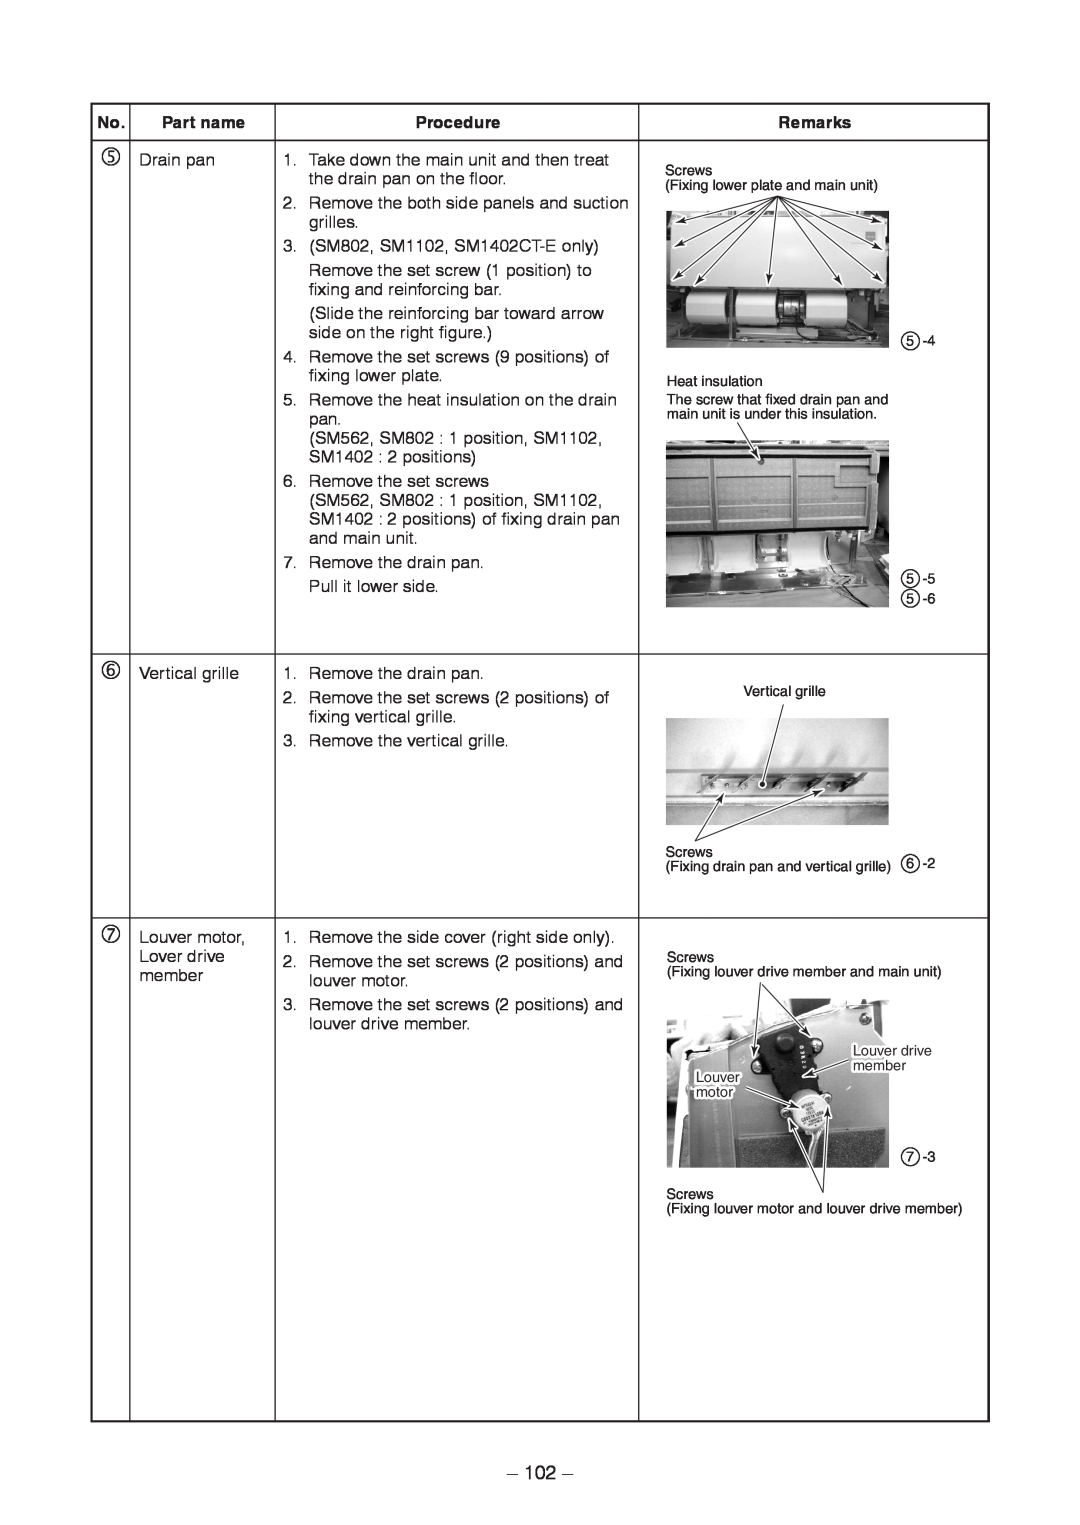 Toshiba CEILING TYPE, CONCEALED DUCK TYPE service manual 102, Part name, Procedure, Remarks 